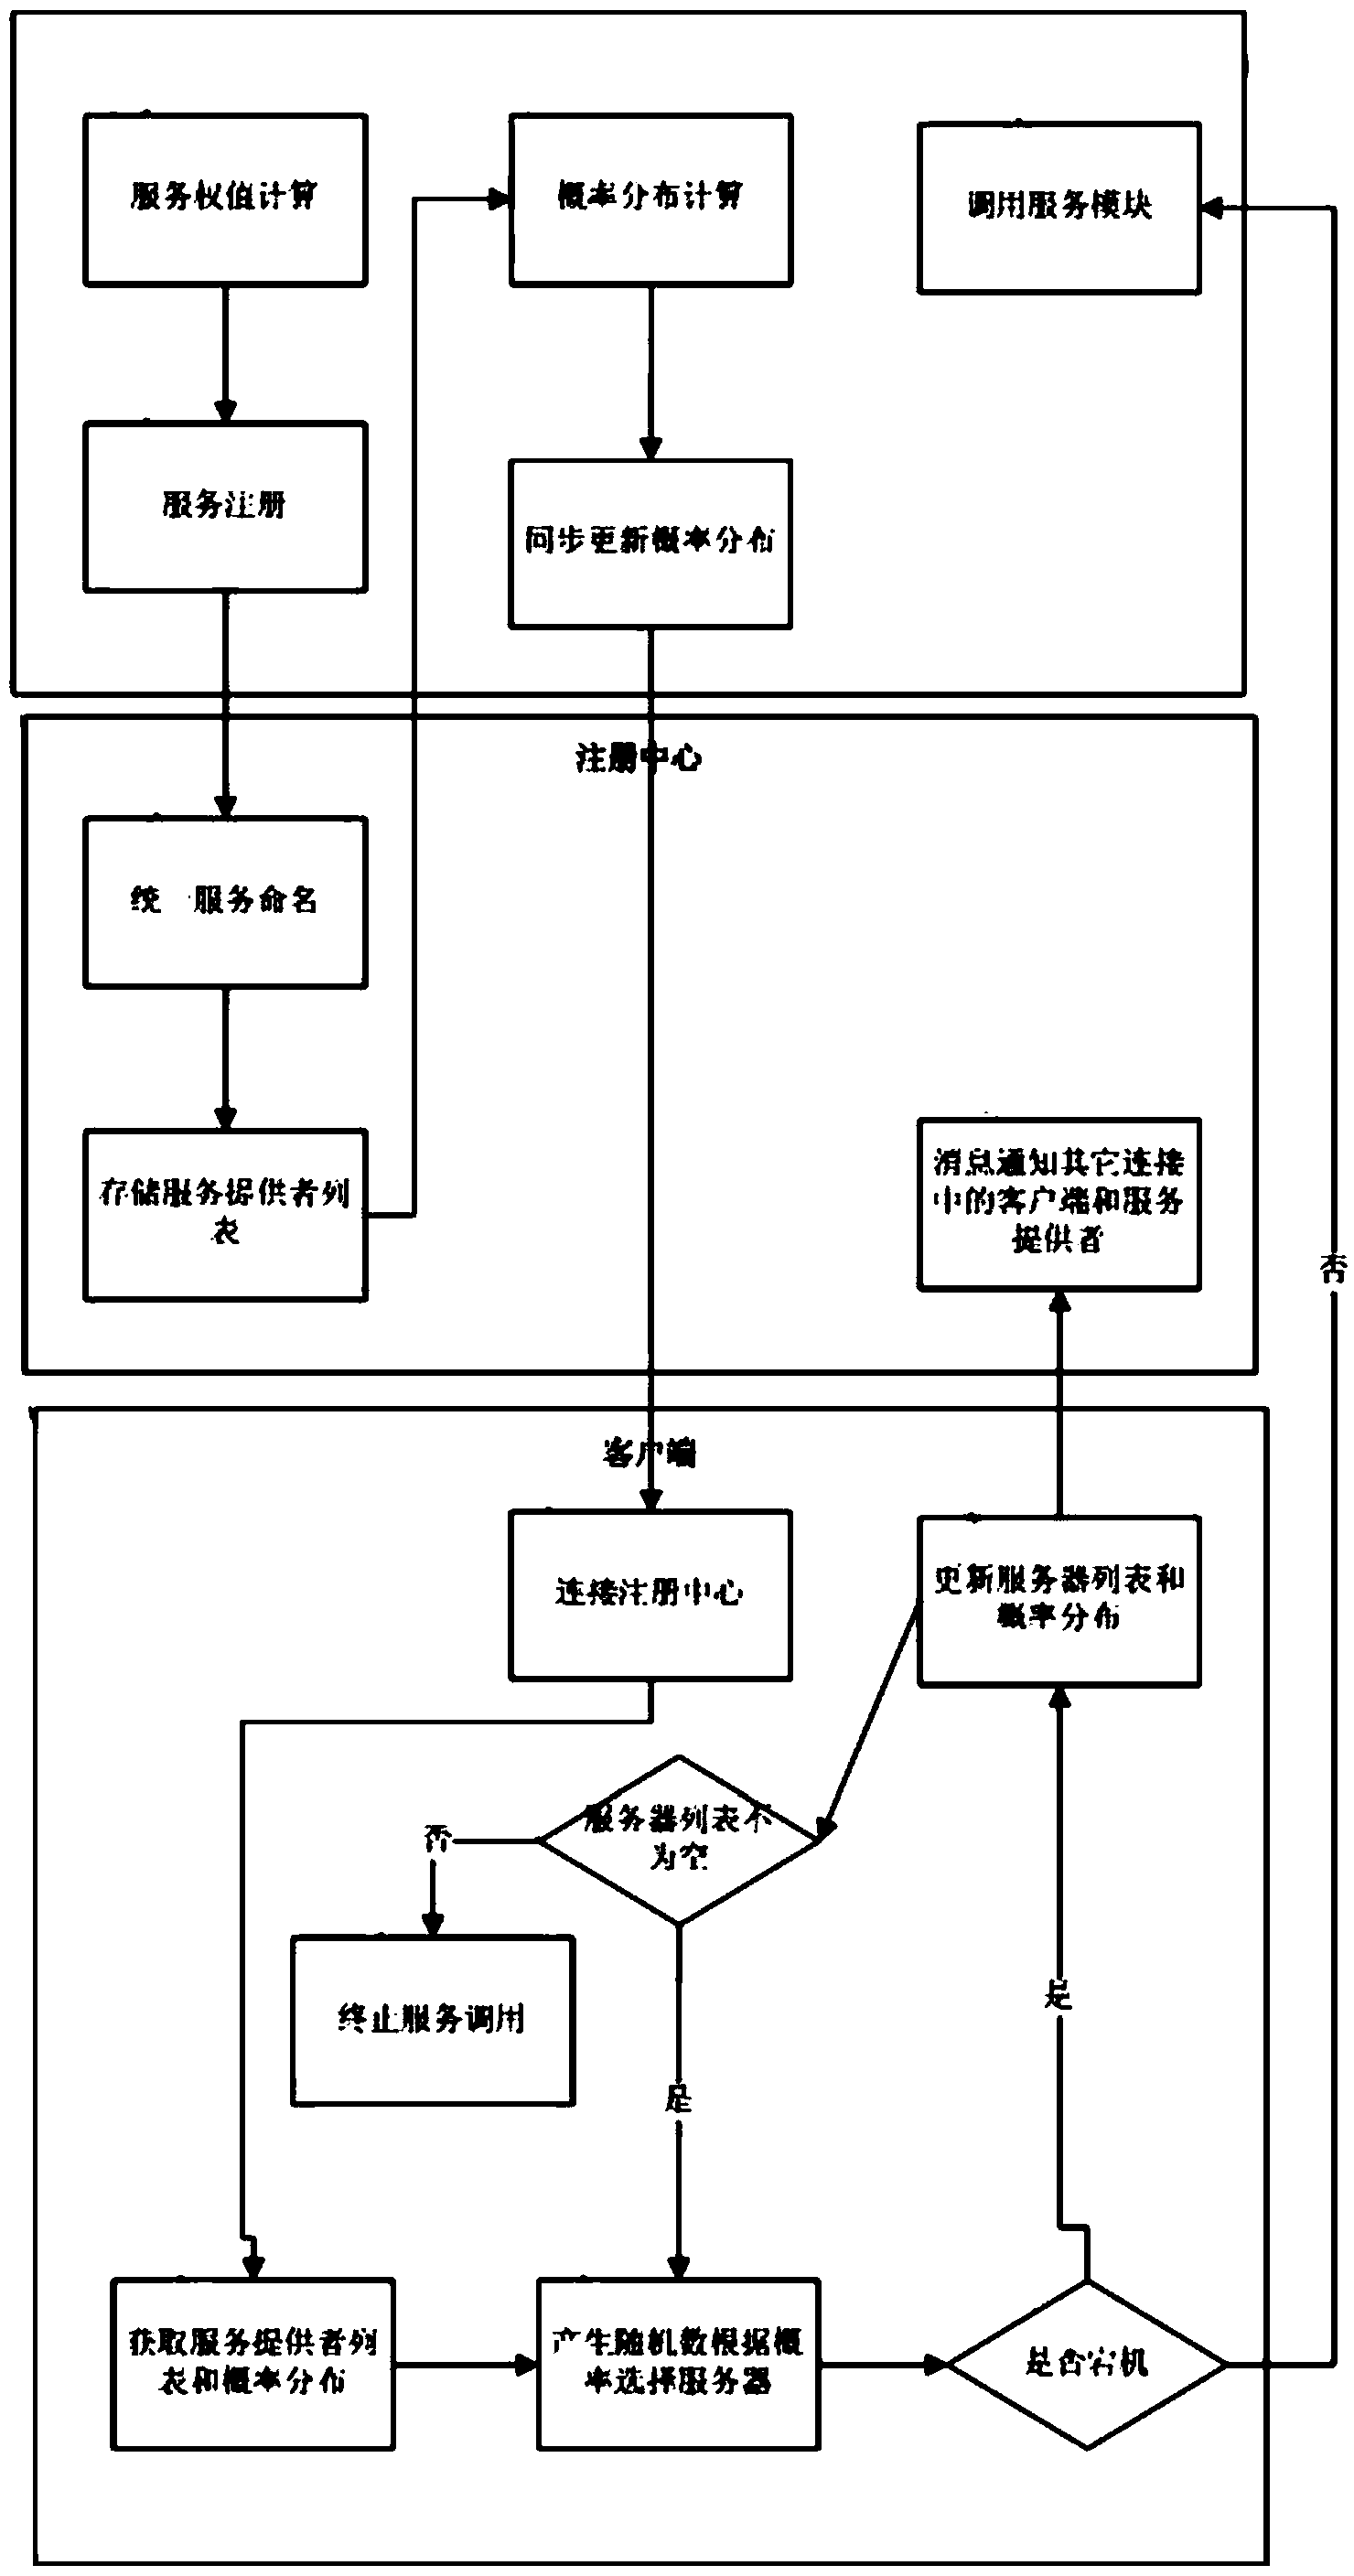 Load-balancing and high-availability sub system used for distribution-type system and method